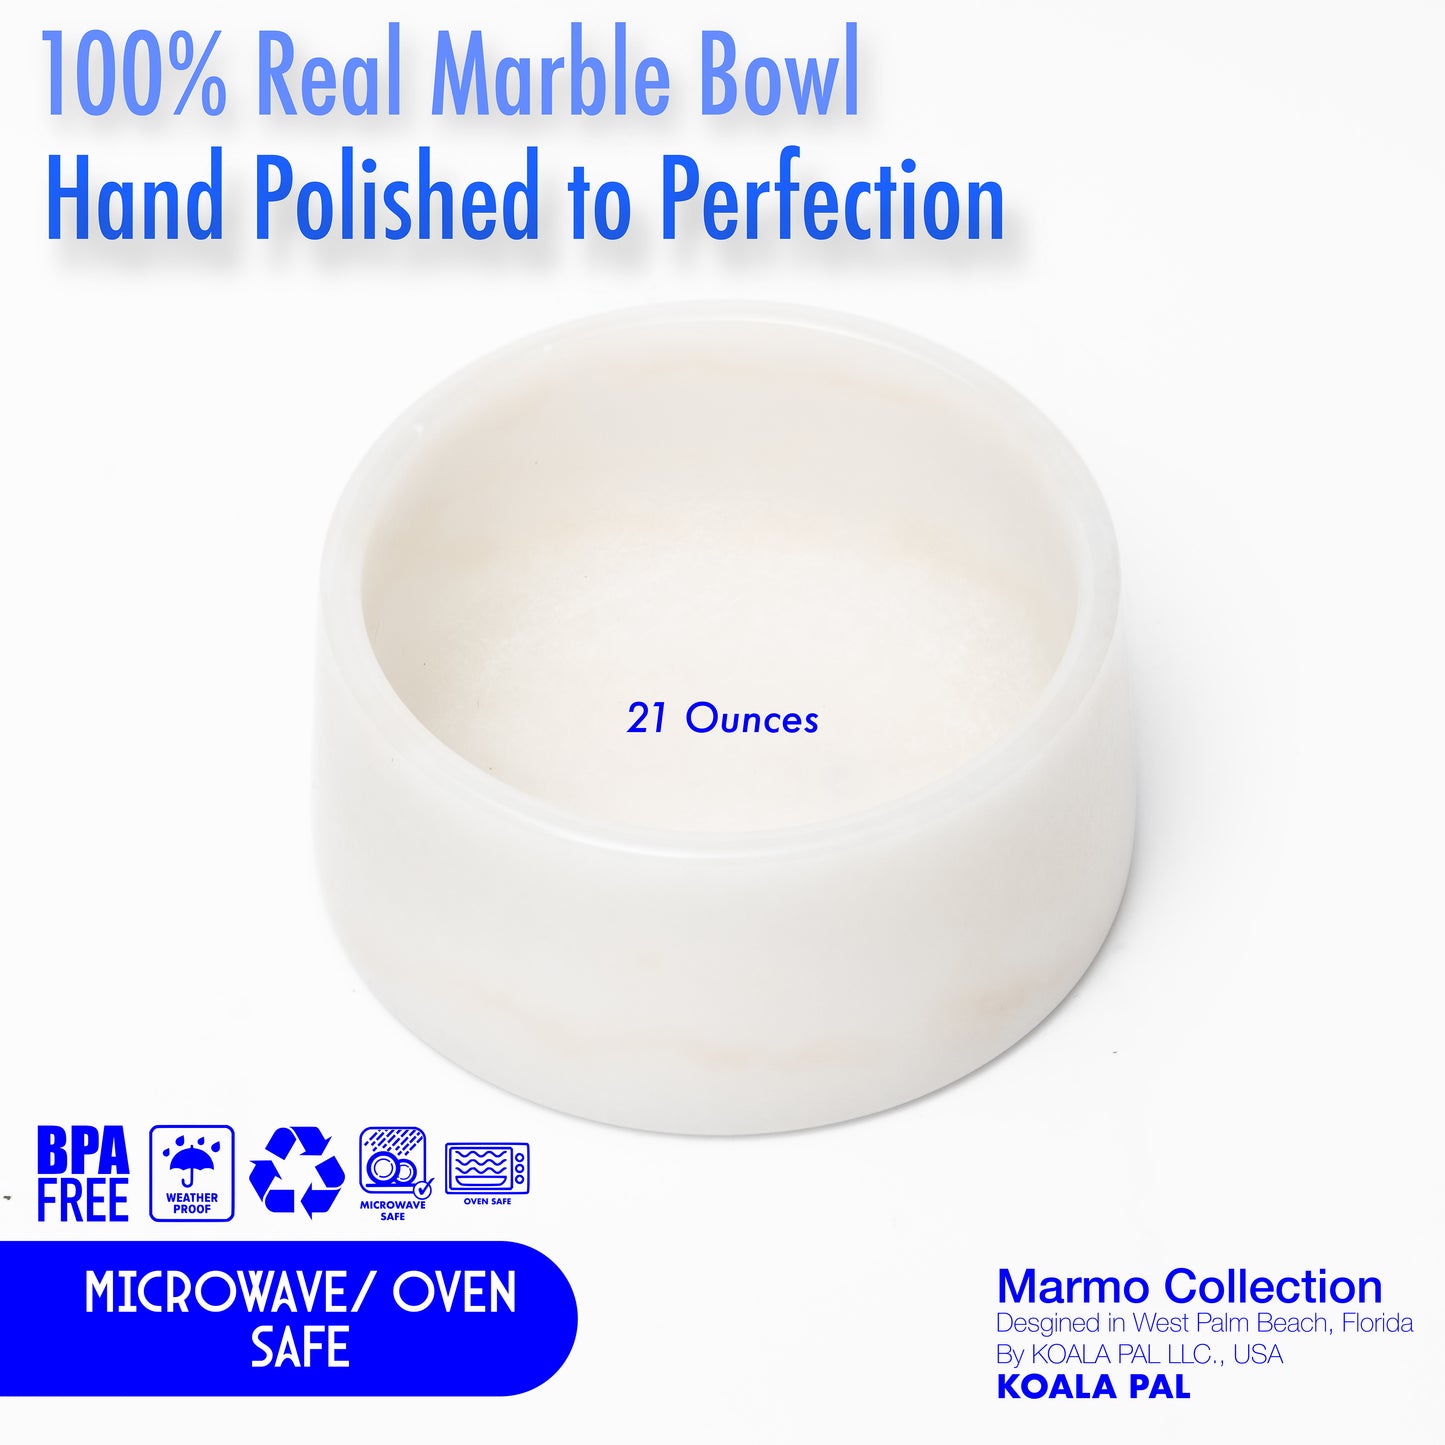 Marmo Collection - 100% Real Marble Pet Bowl